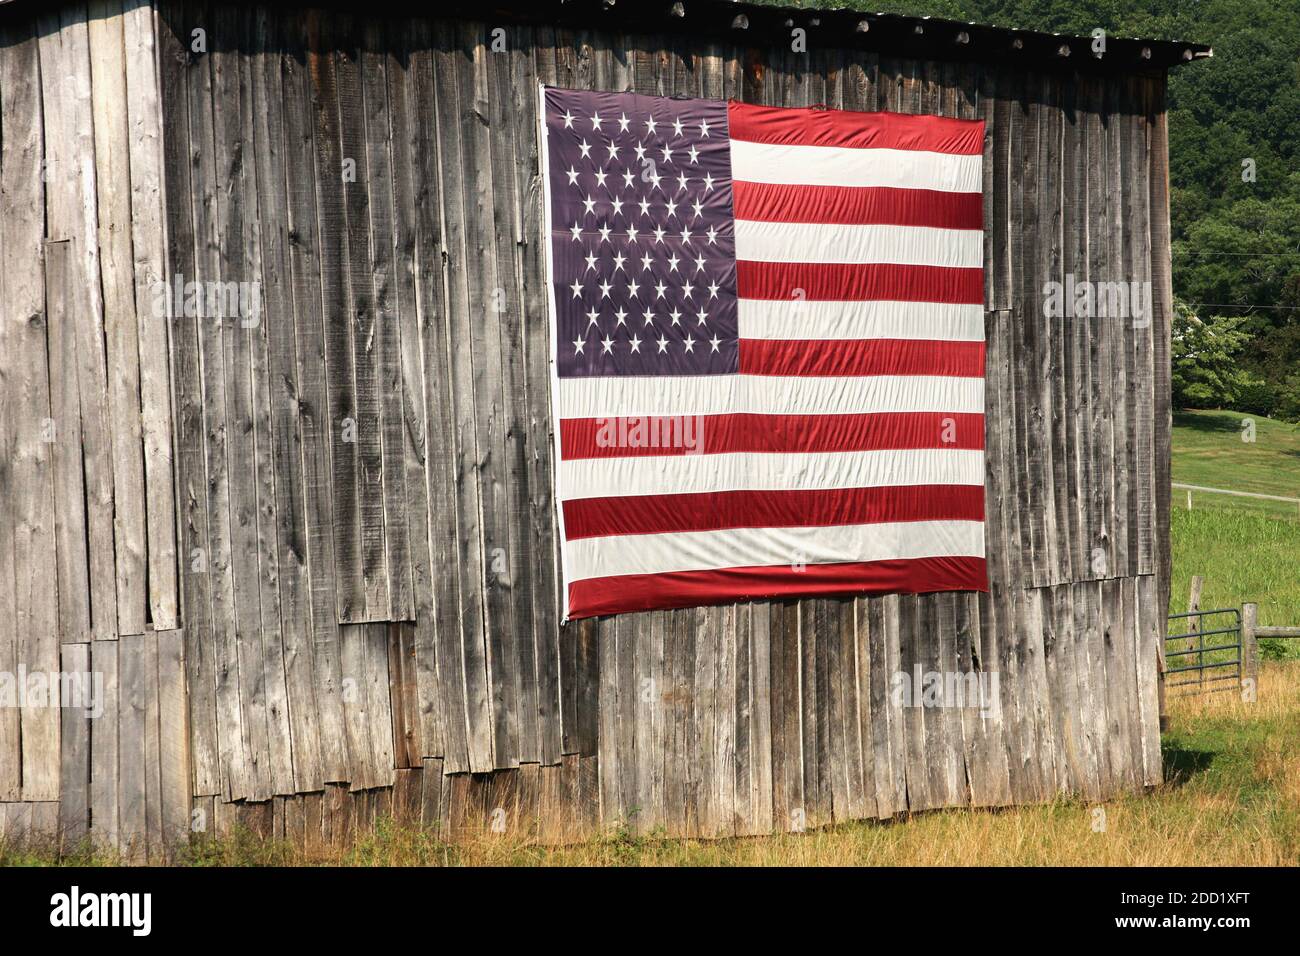 U.S. flag on a shed in rural Virginia, USA Stock Photo